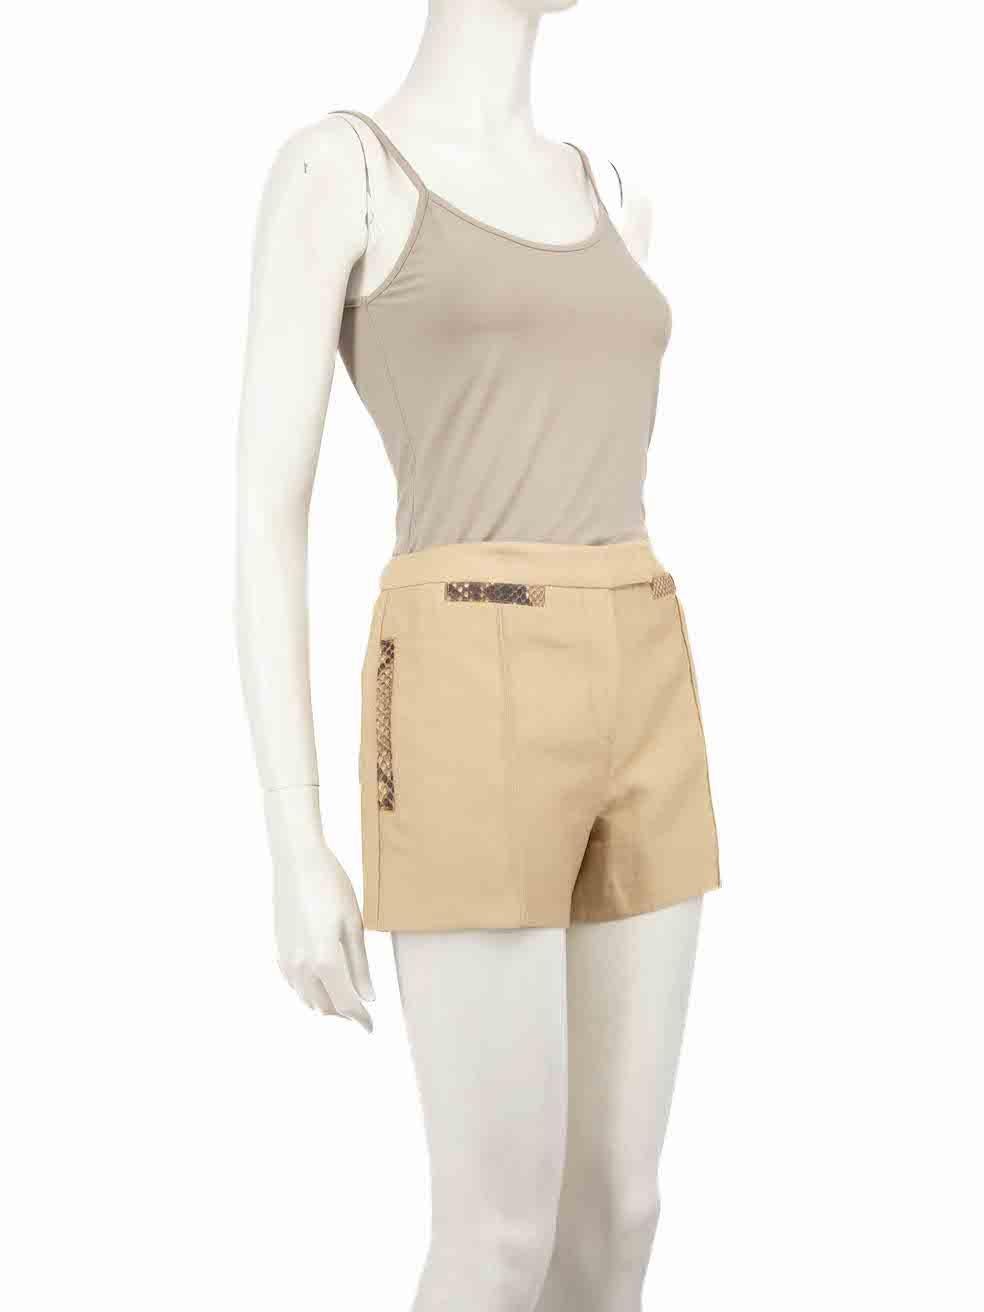 CONDITION is Very good. Minimal wear to shorts is evident. Minimal pilling to snakeskin leather panel on this used J.Mendel designer resale item.
 
 
 
 Details
 
 
 Beige
 
 Cotton
 
 Shorts
 
 Python leather trim
 
 4x Front pockets
 
 Fly zip and